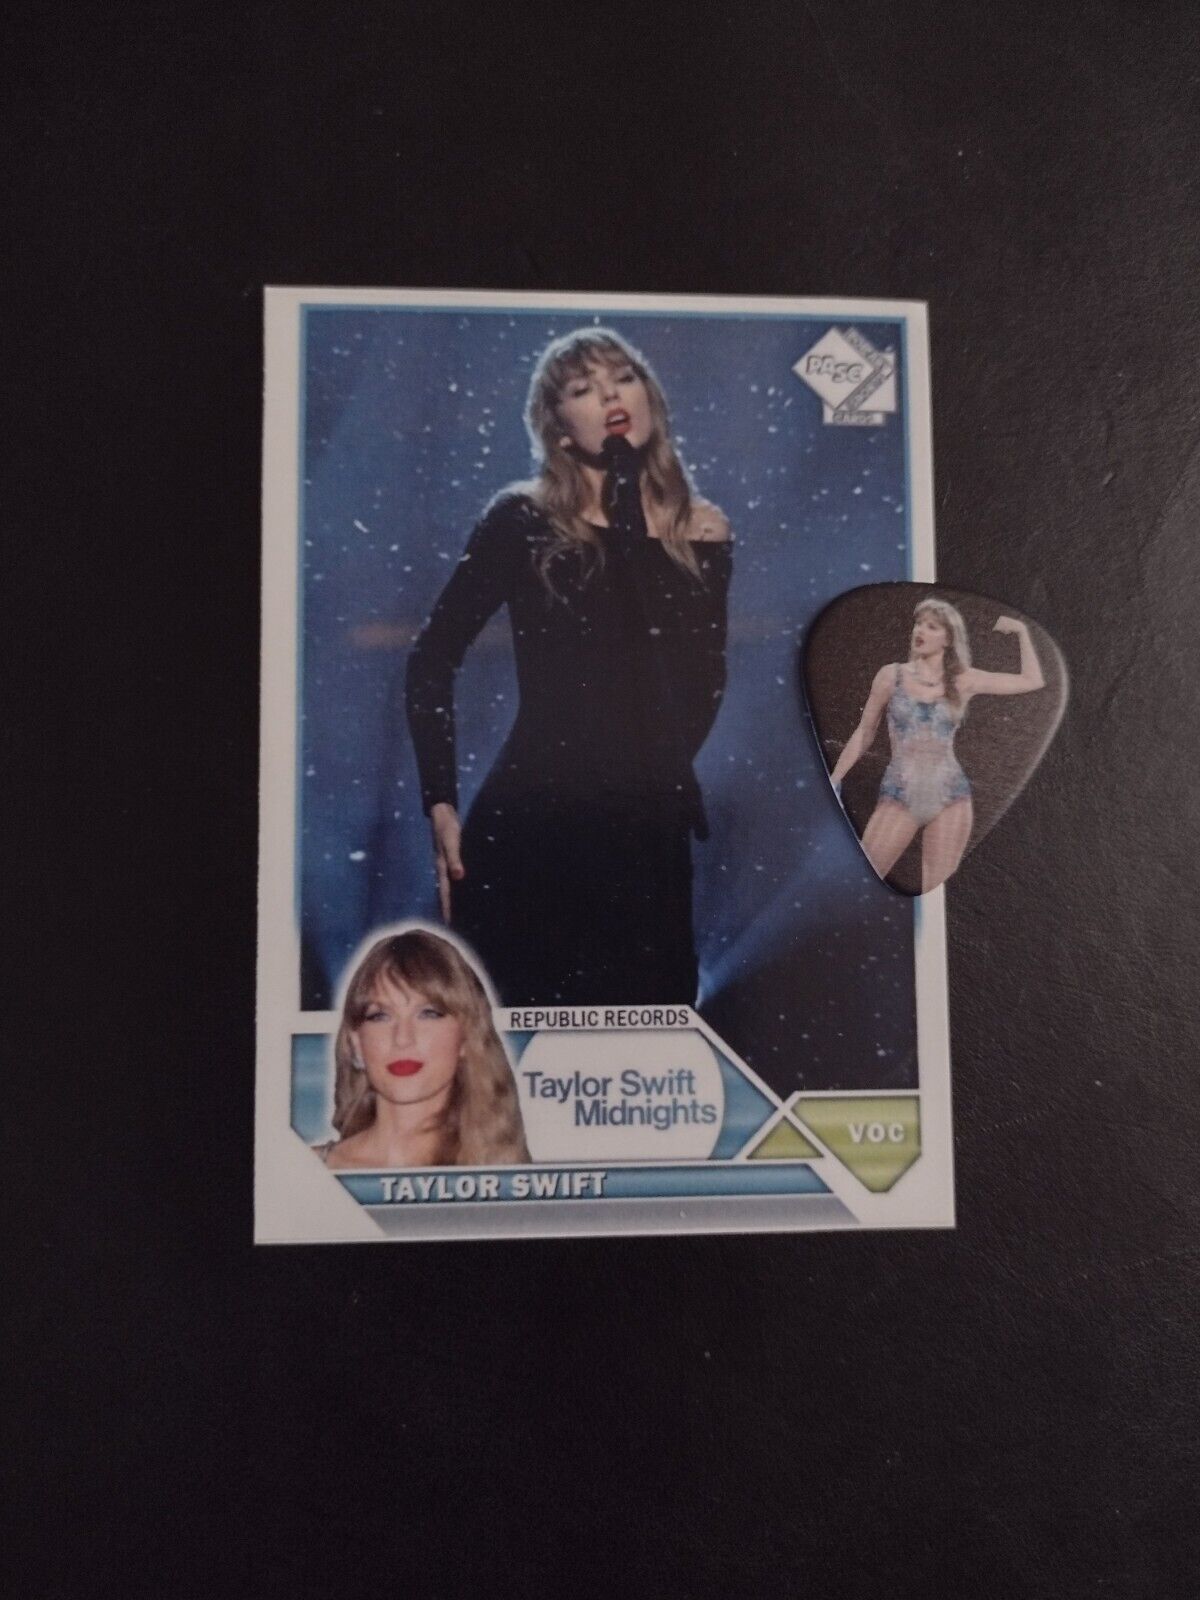 2023 Style Taylor Swift Trading Card and Novelty Guitar Pick - Midnights